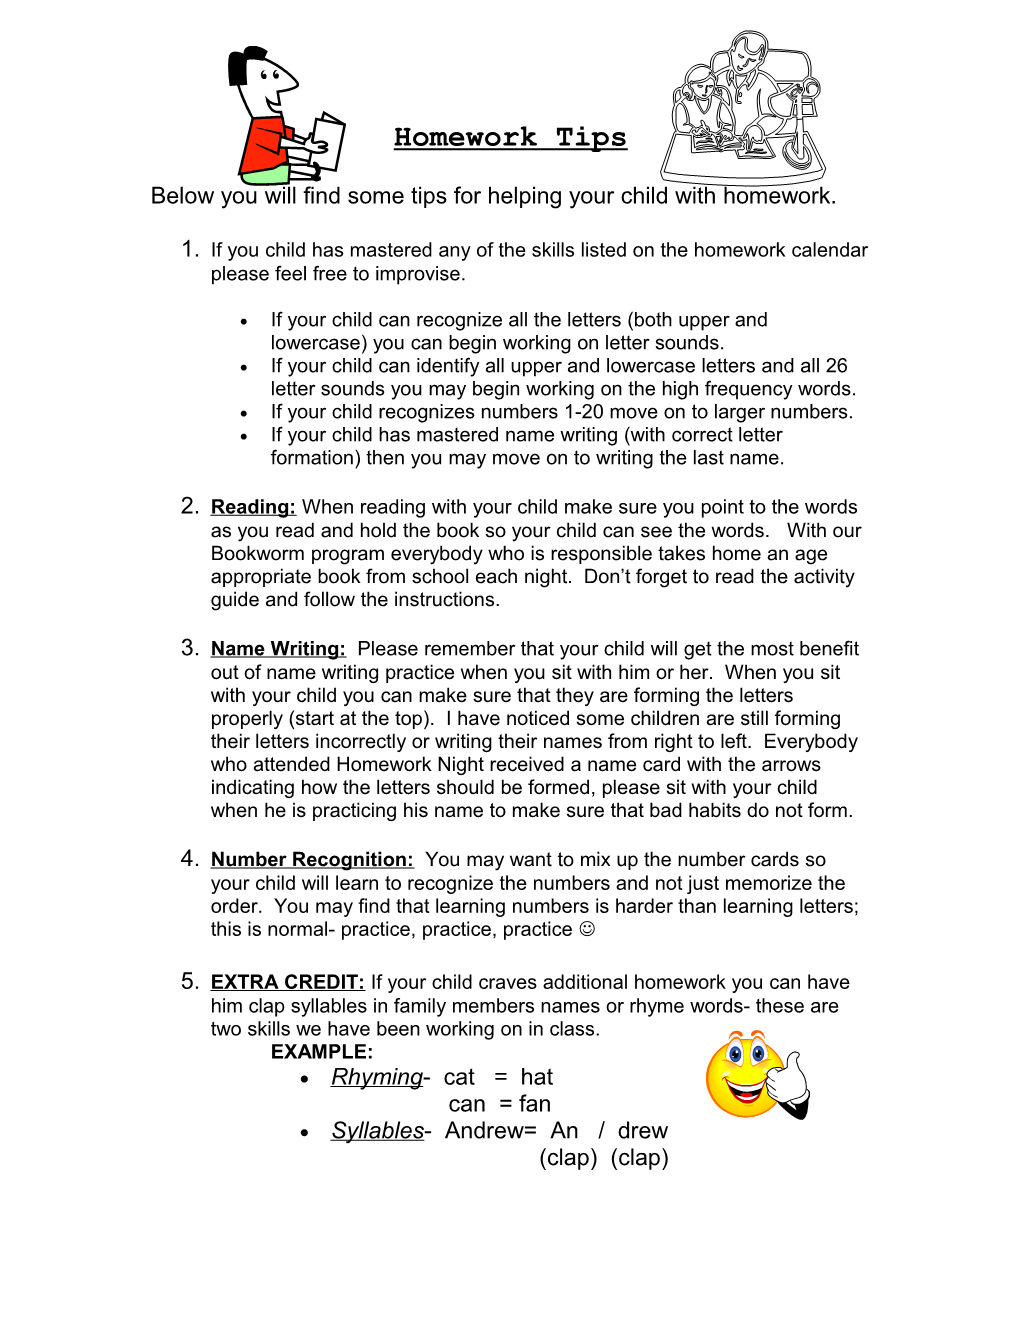 Below You Will Find Some Tips for Helping Your Child with Homework